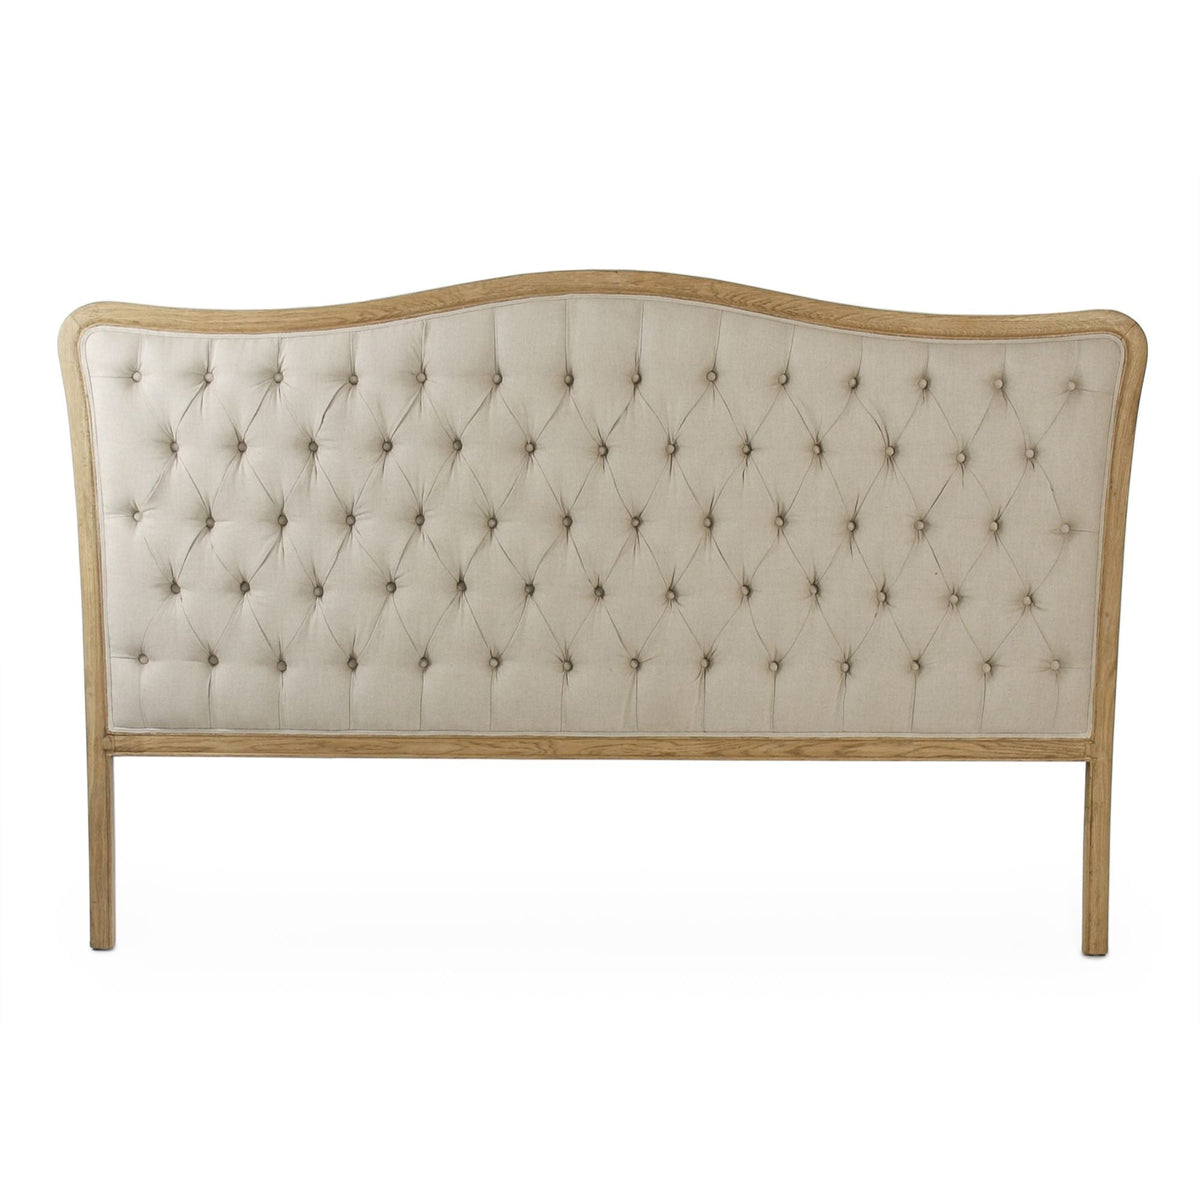 Maison Tufted Headboard King by Zentique